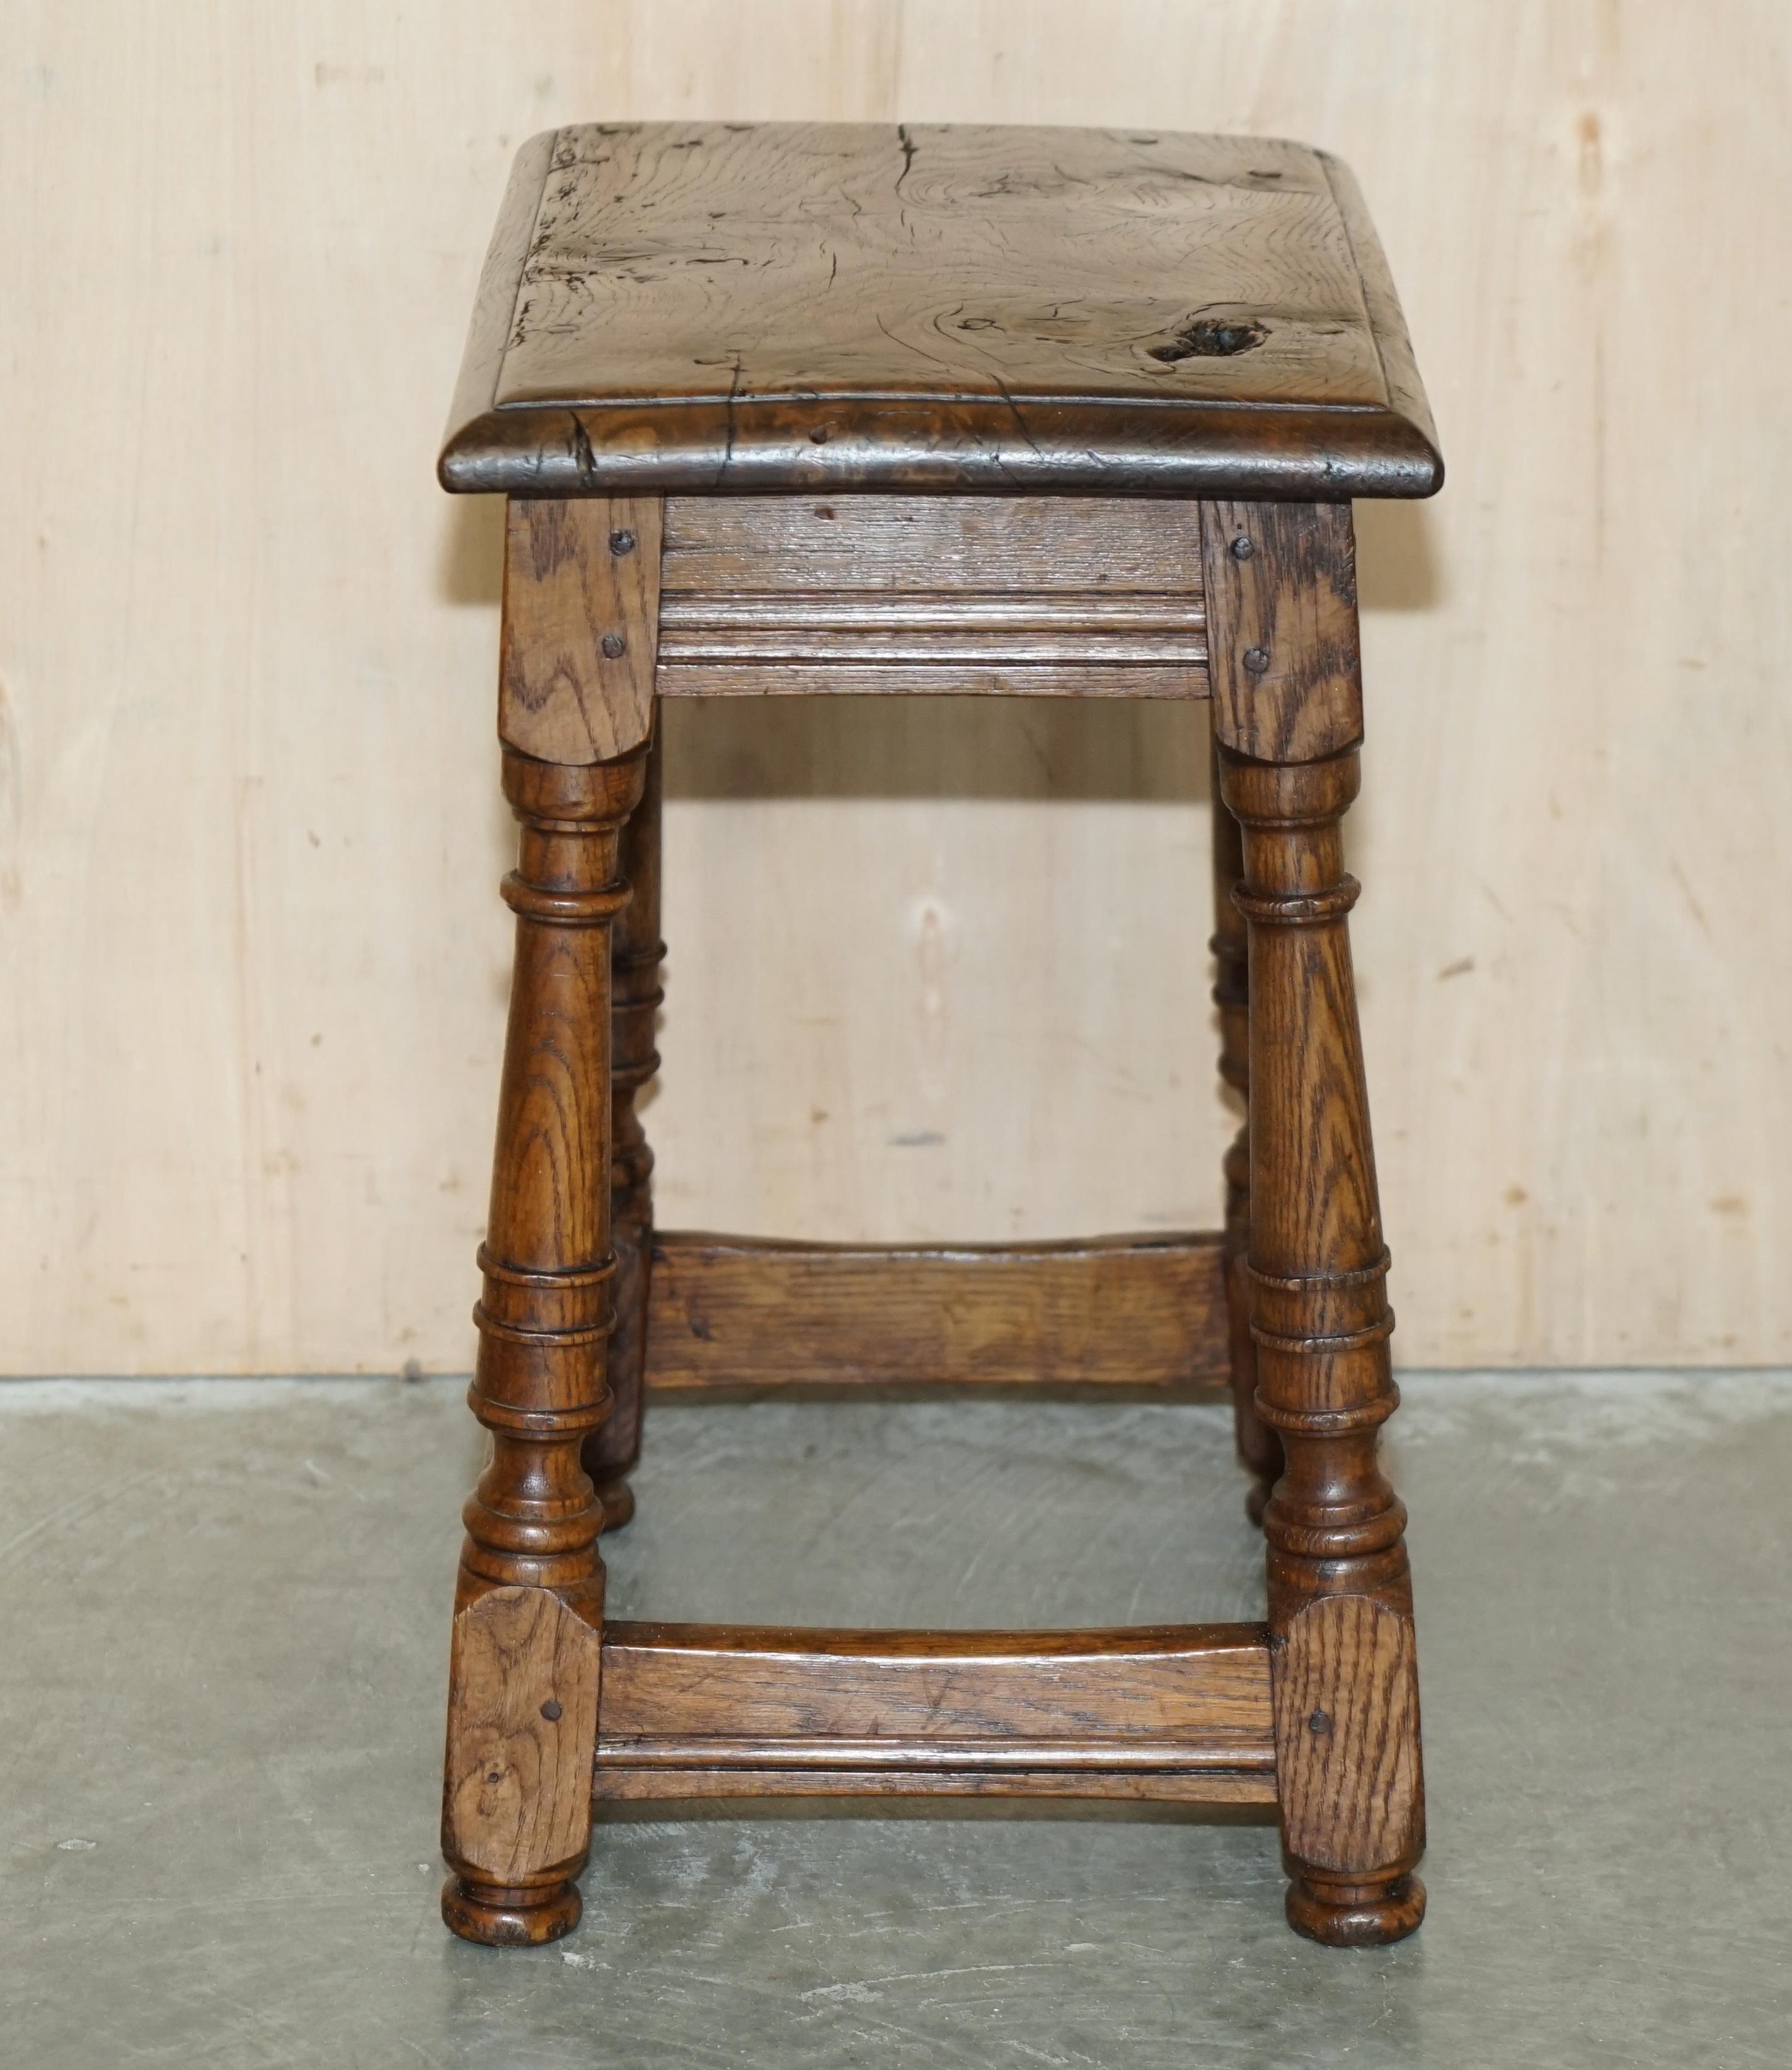 STUNNiNG HEAVILY BURRED OAK ANTIQUE 18TH CENTURY CIRCA 1780 JOINTED STOOL TABLE For Sale 11